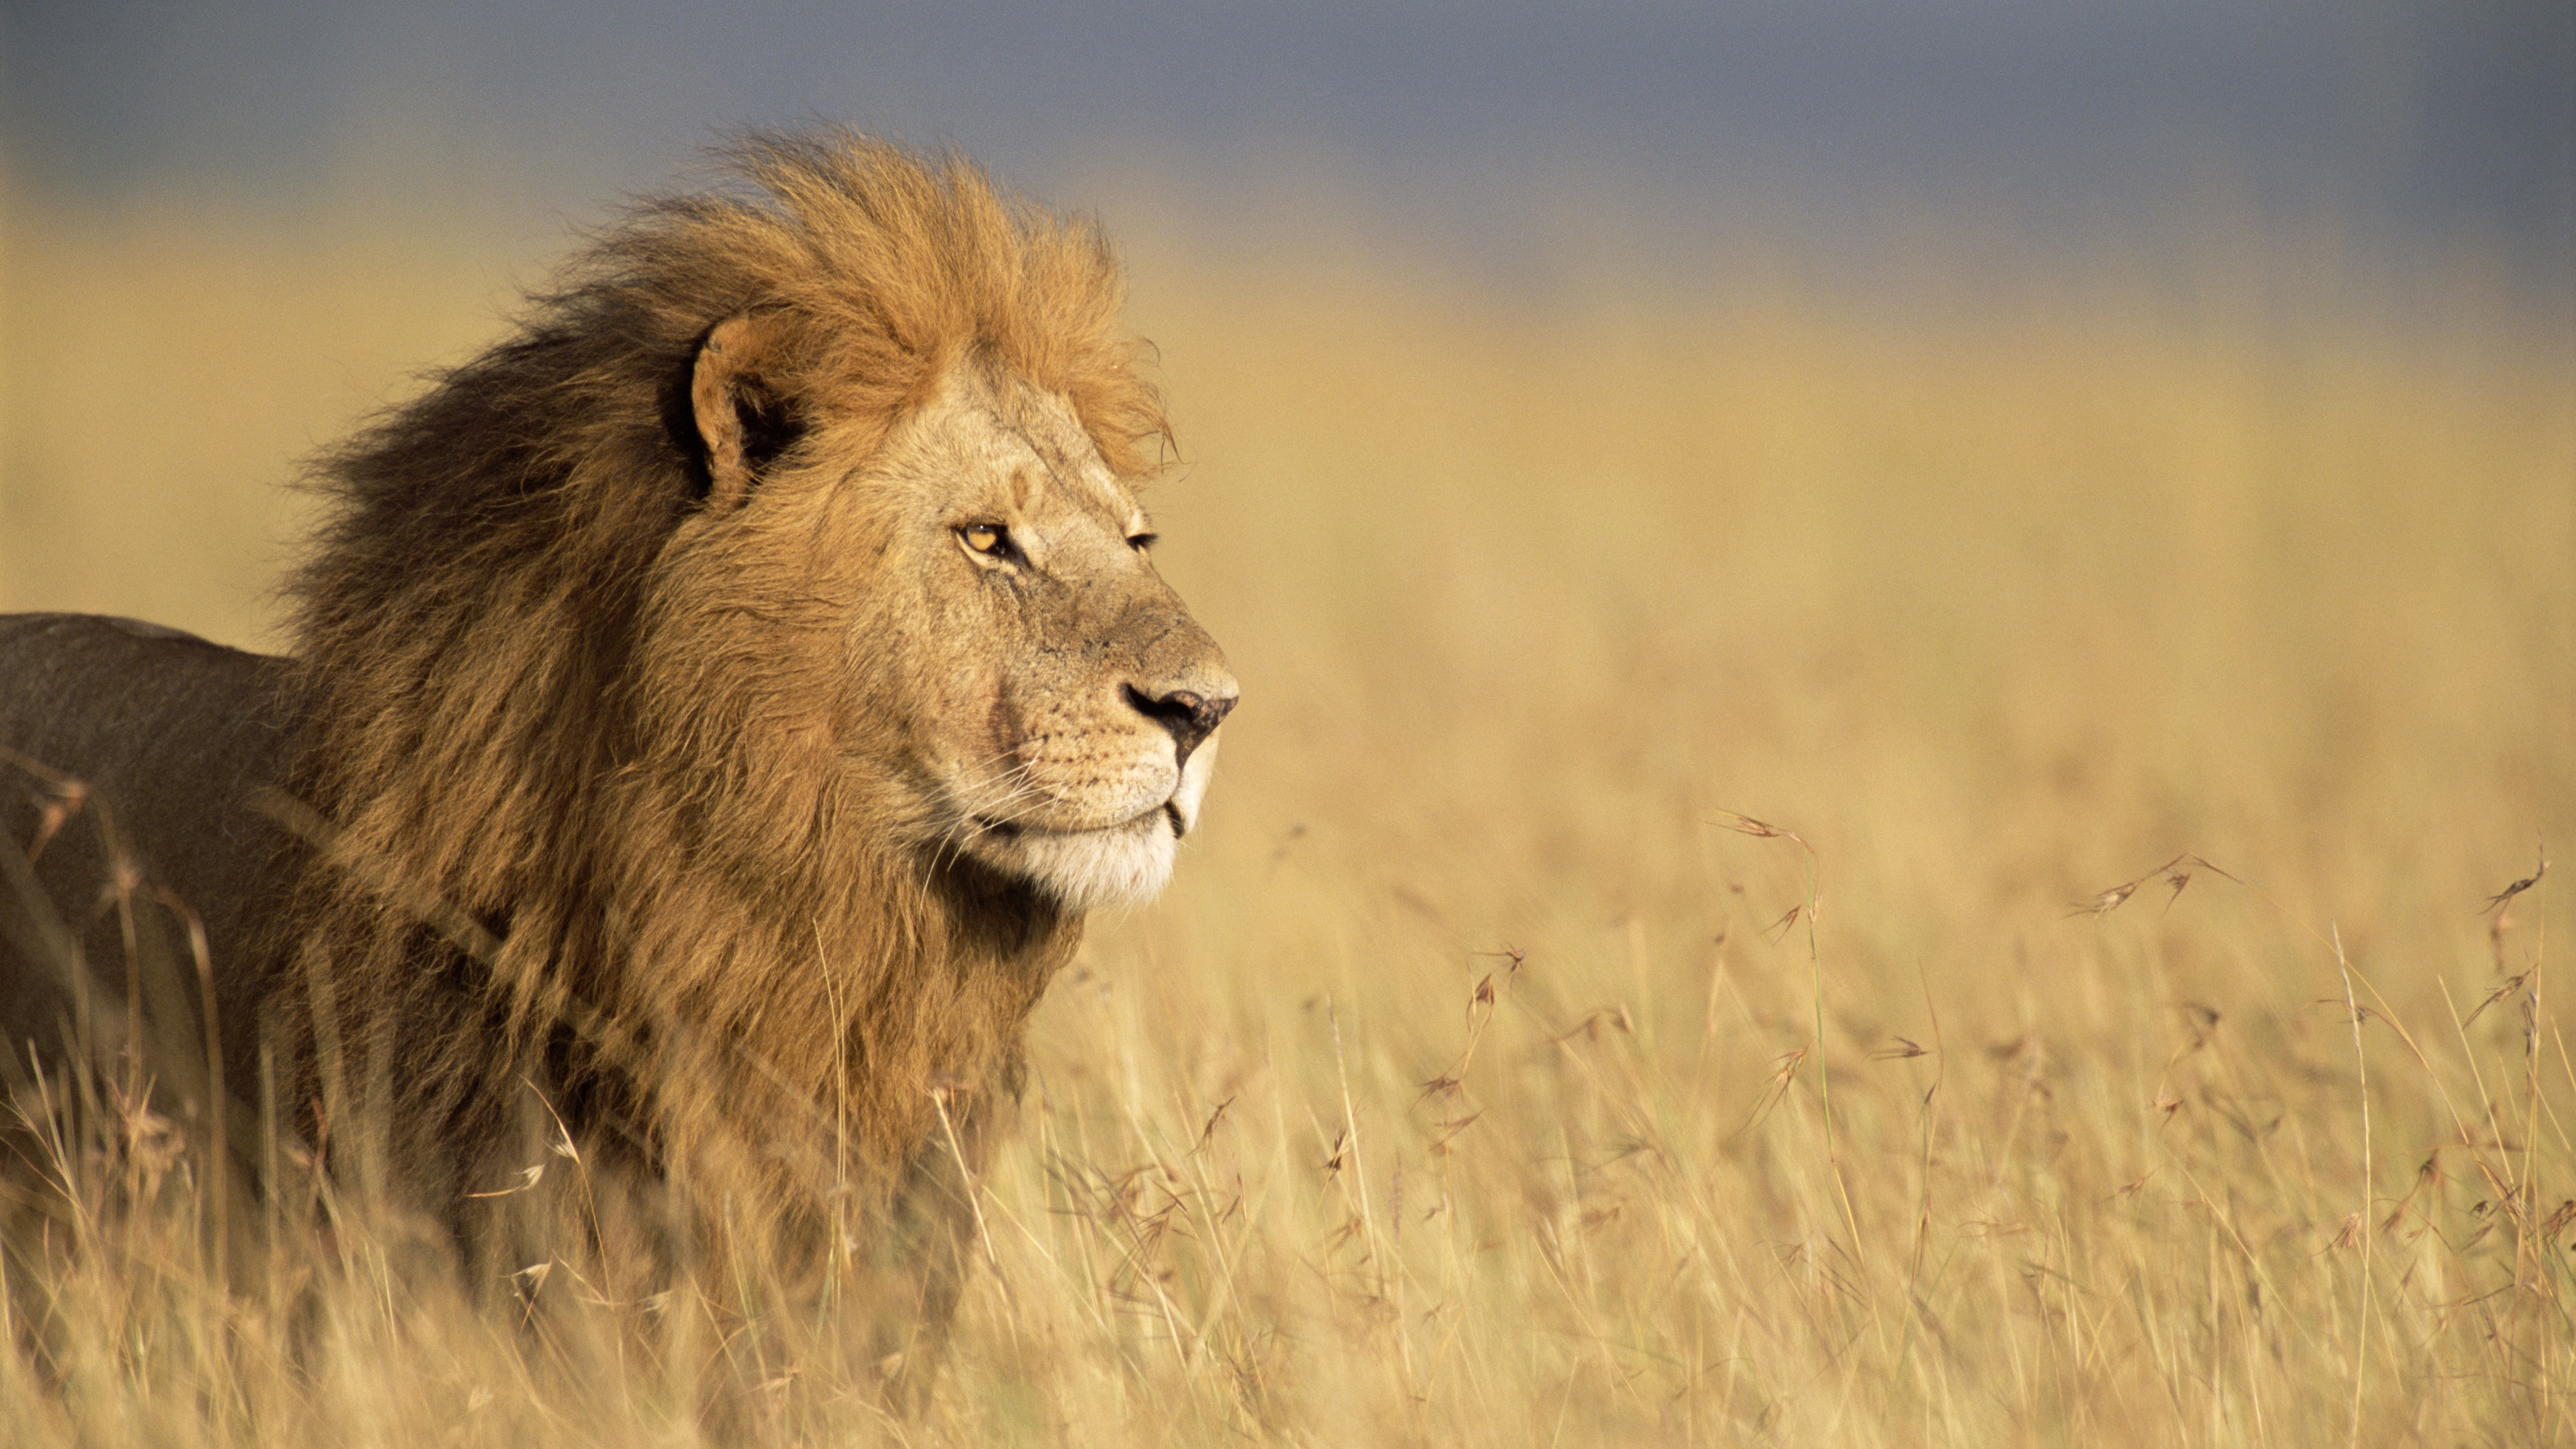 a lion with a large main standing in grassland on the left of the image